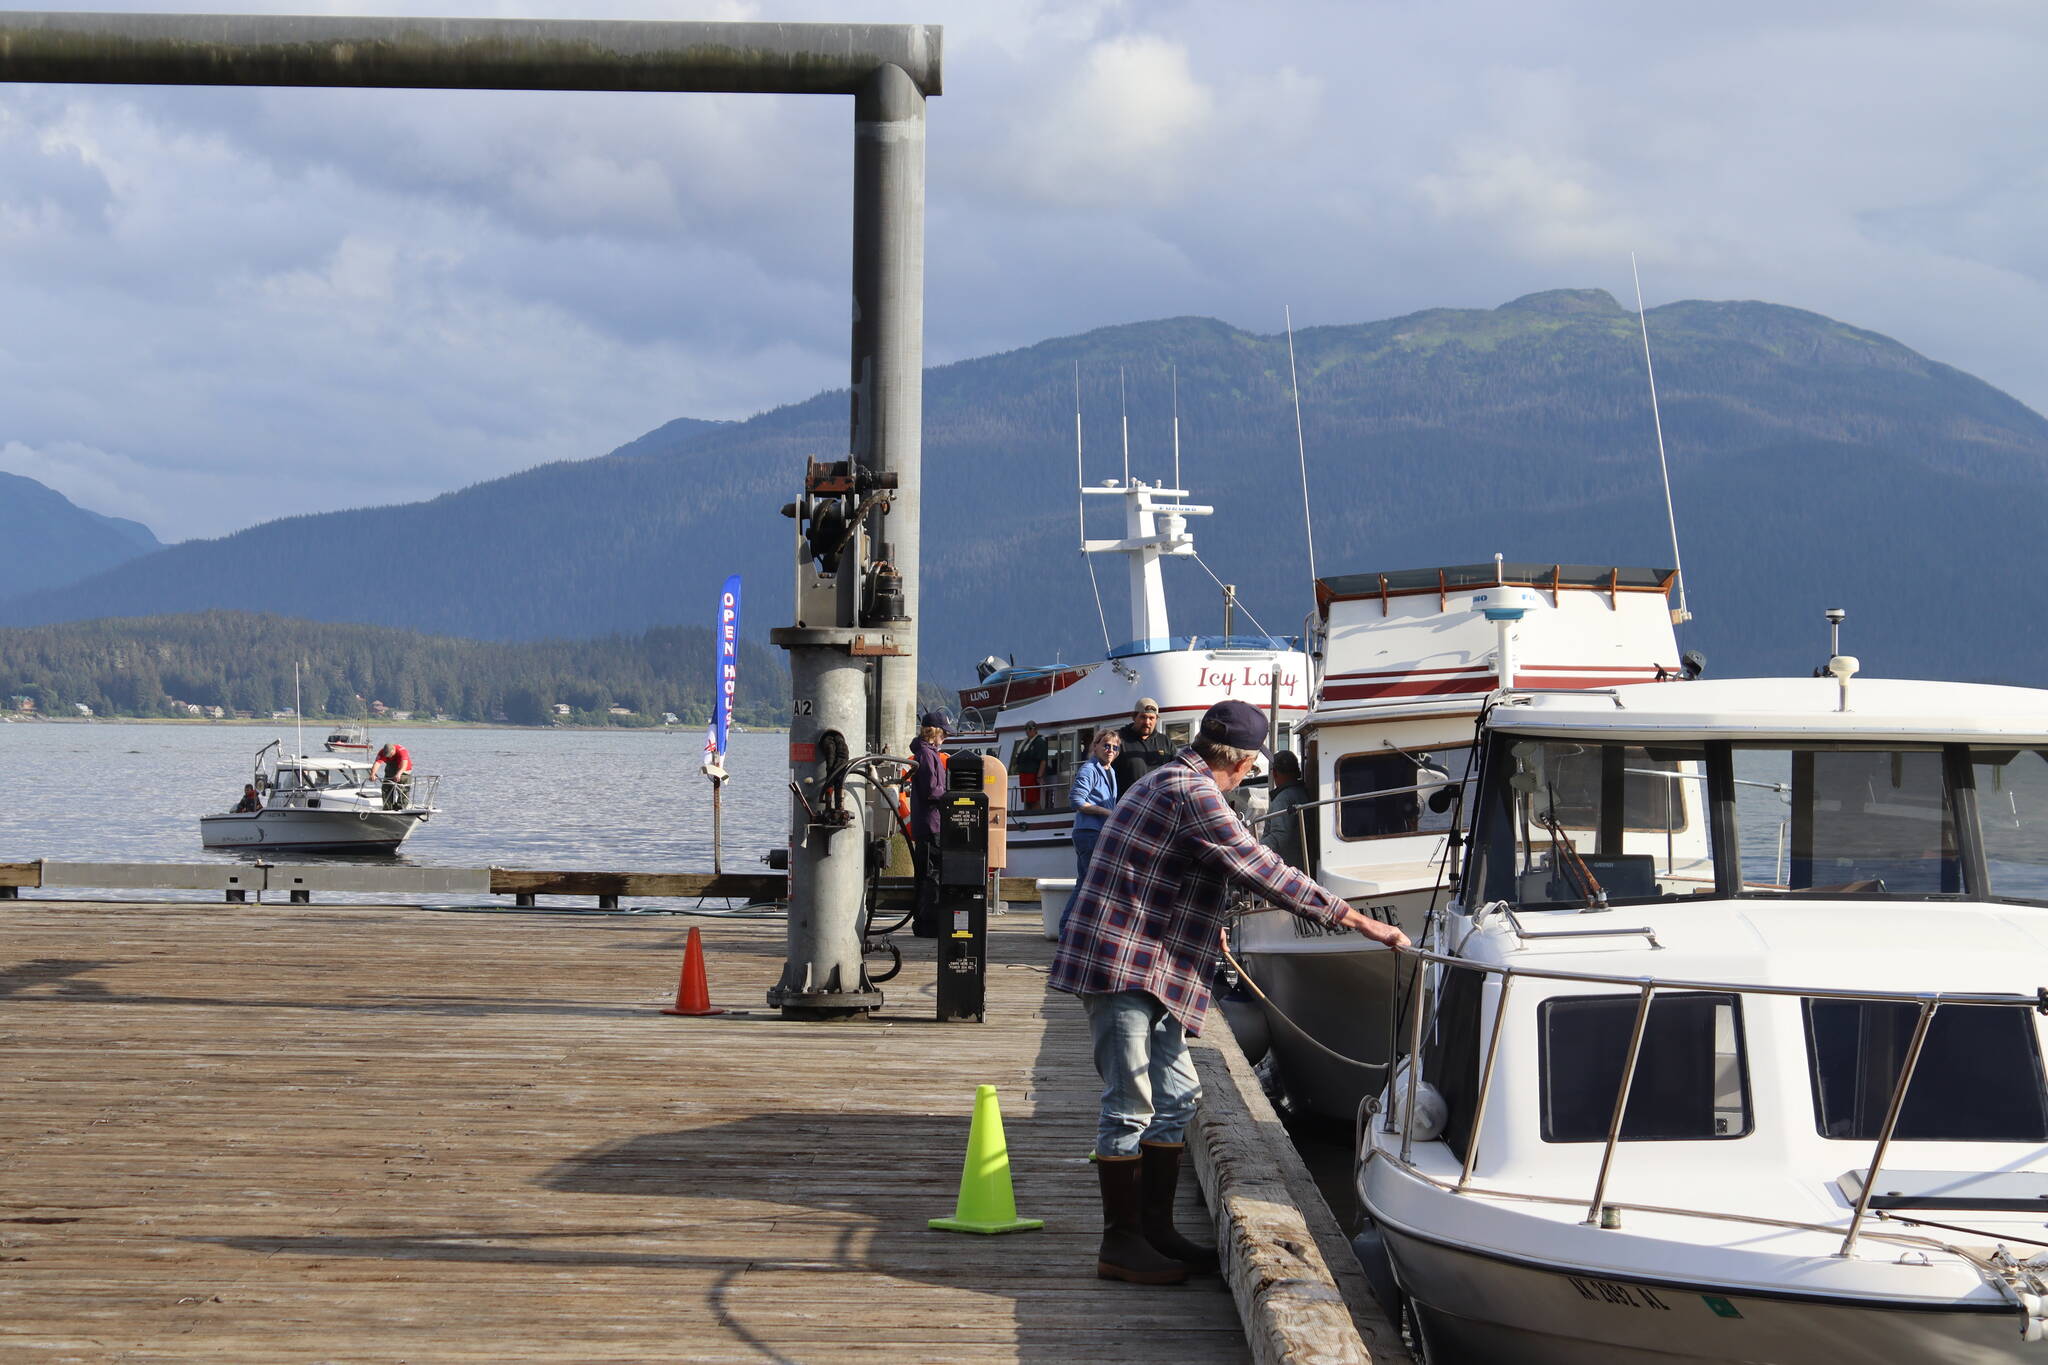 Boats and people line up to drop off and weigh their catch at the Auke Nu Cove station on Sunday evening as the 77th Annual Golden North Salmon Derby draws to a close. (Meredith Jordan / Juneau Empire)